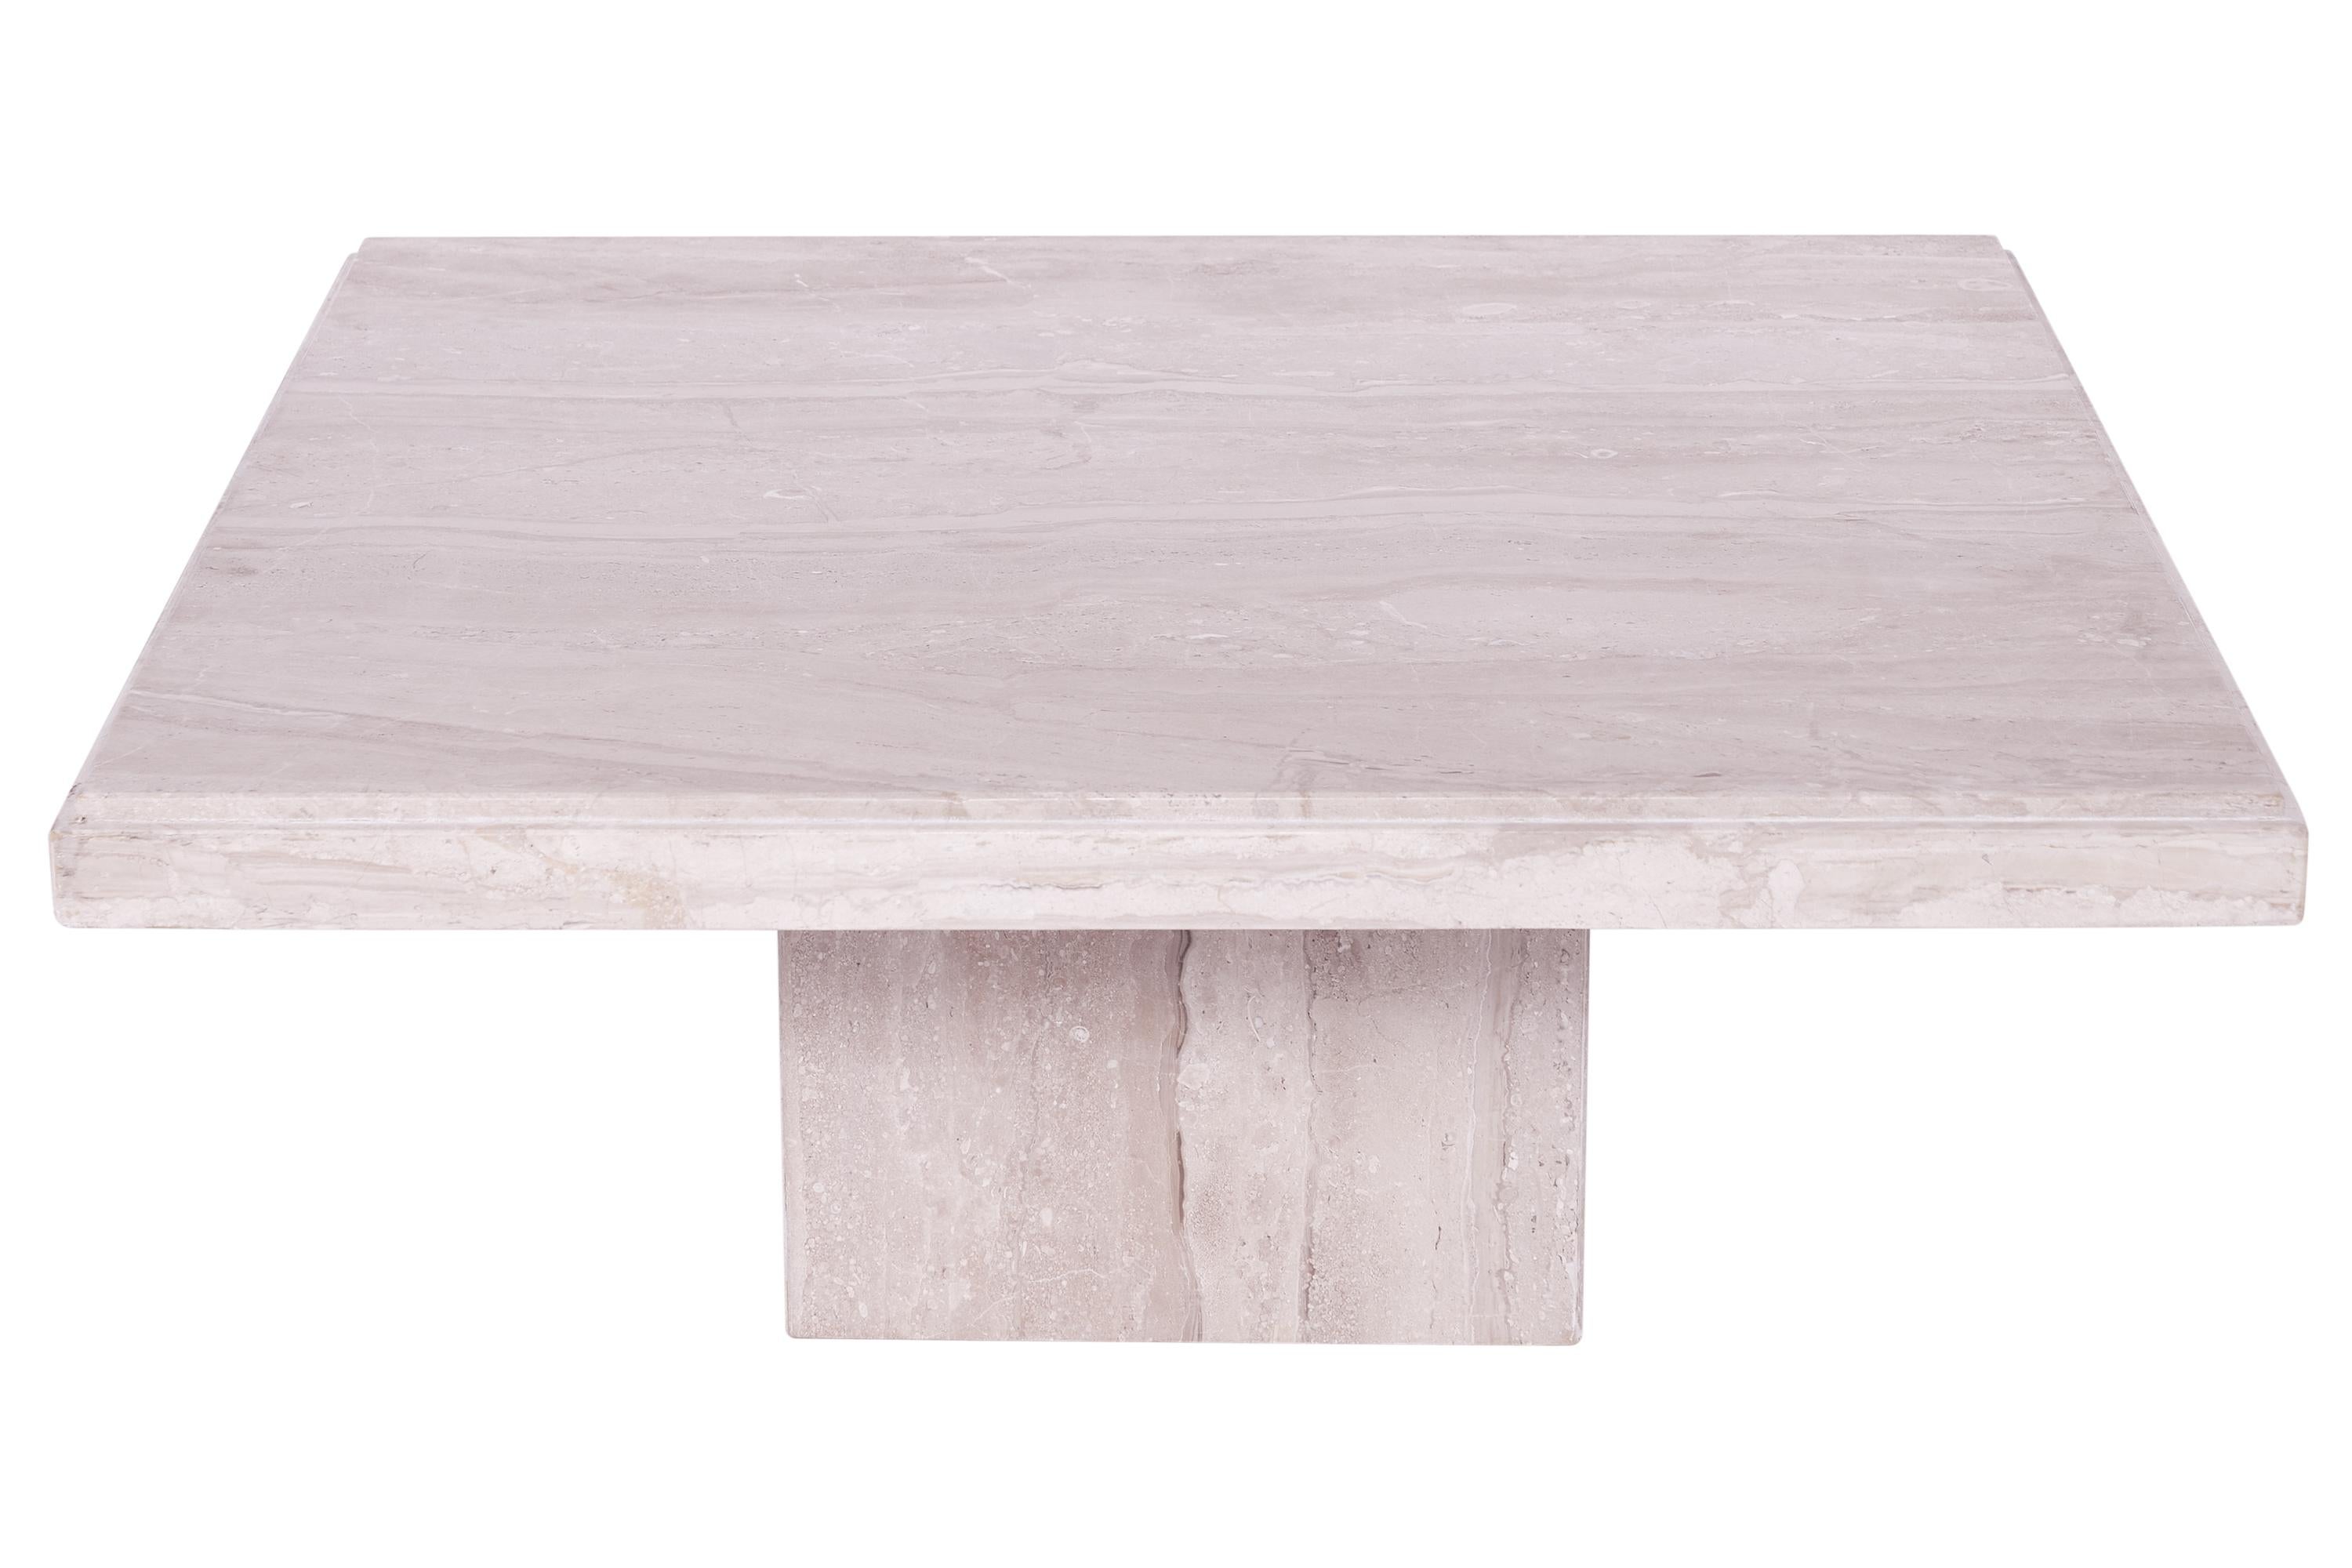 A fabulous stone coffee table crafted out of travertine marble. This table has an eye-catching has a square top with rounded edges and rests on a floating base. This Minimalist coffee marble table would make a great addition to any home or office